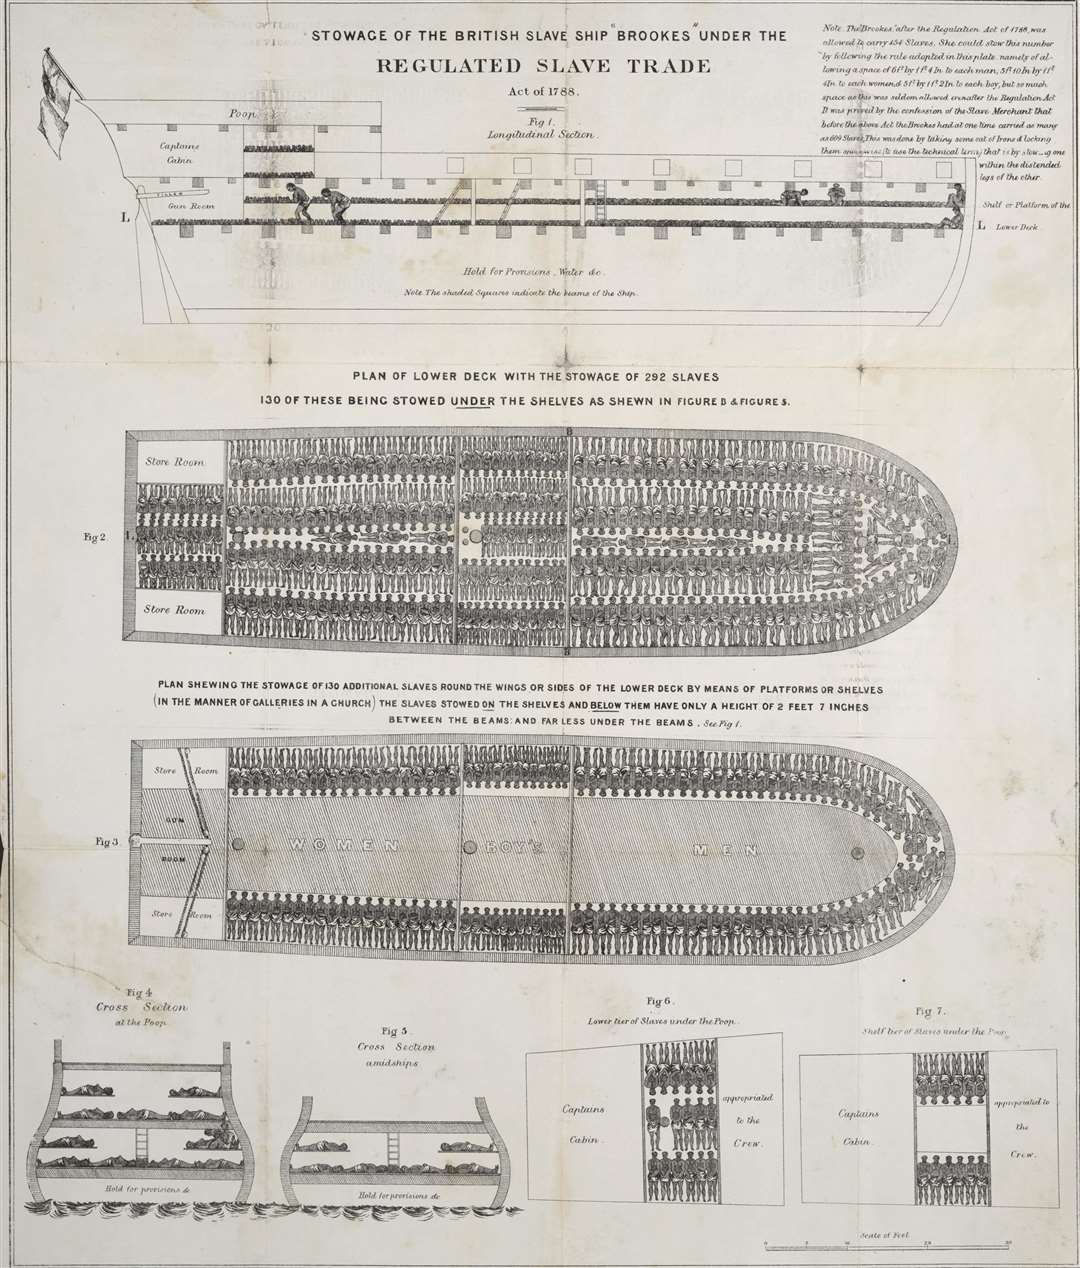 A plan of the British slave ship Brookes, showing how 454 slaves were accommodated on board. This same ship had reportedly carried as many as 609 people; published by the Society for Effecting the Abolition of the Slave Trade